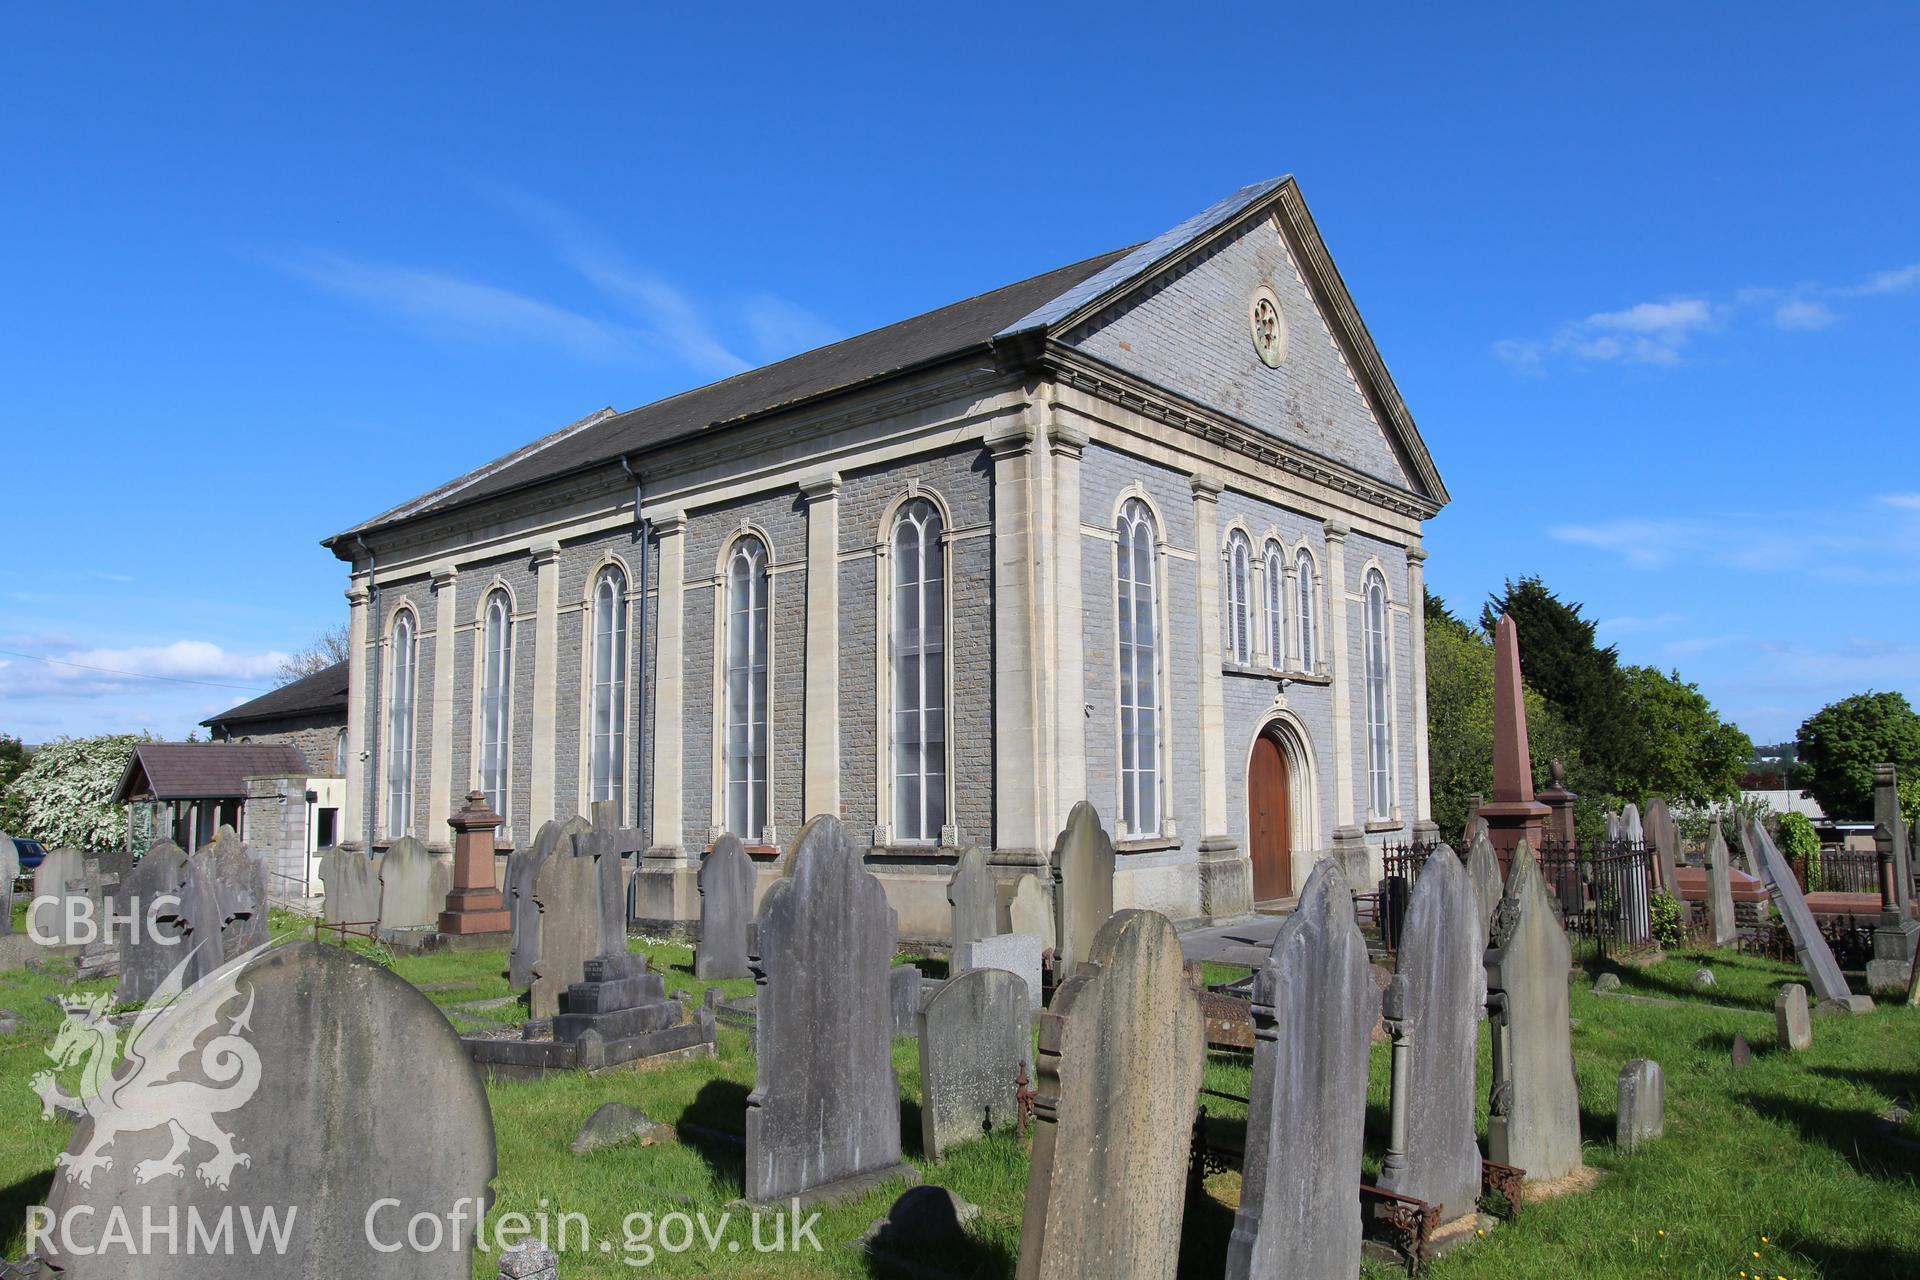 Exterior view of chapel in graveyard setting. Photographic survey of Seion Welsh Baptist Chapel, Morriston, conducted by Sue Fielding on 13th May 2017.